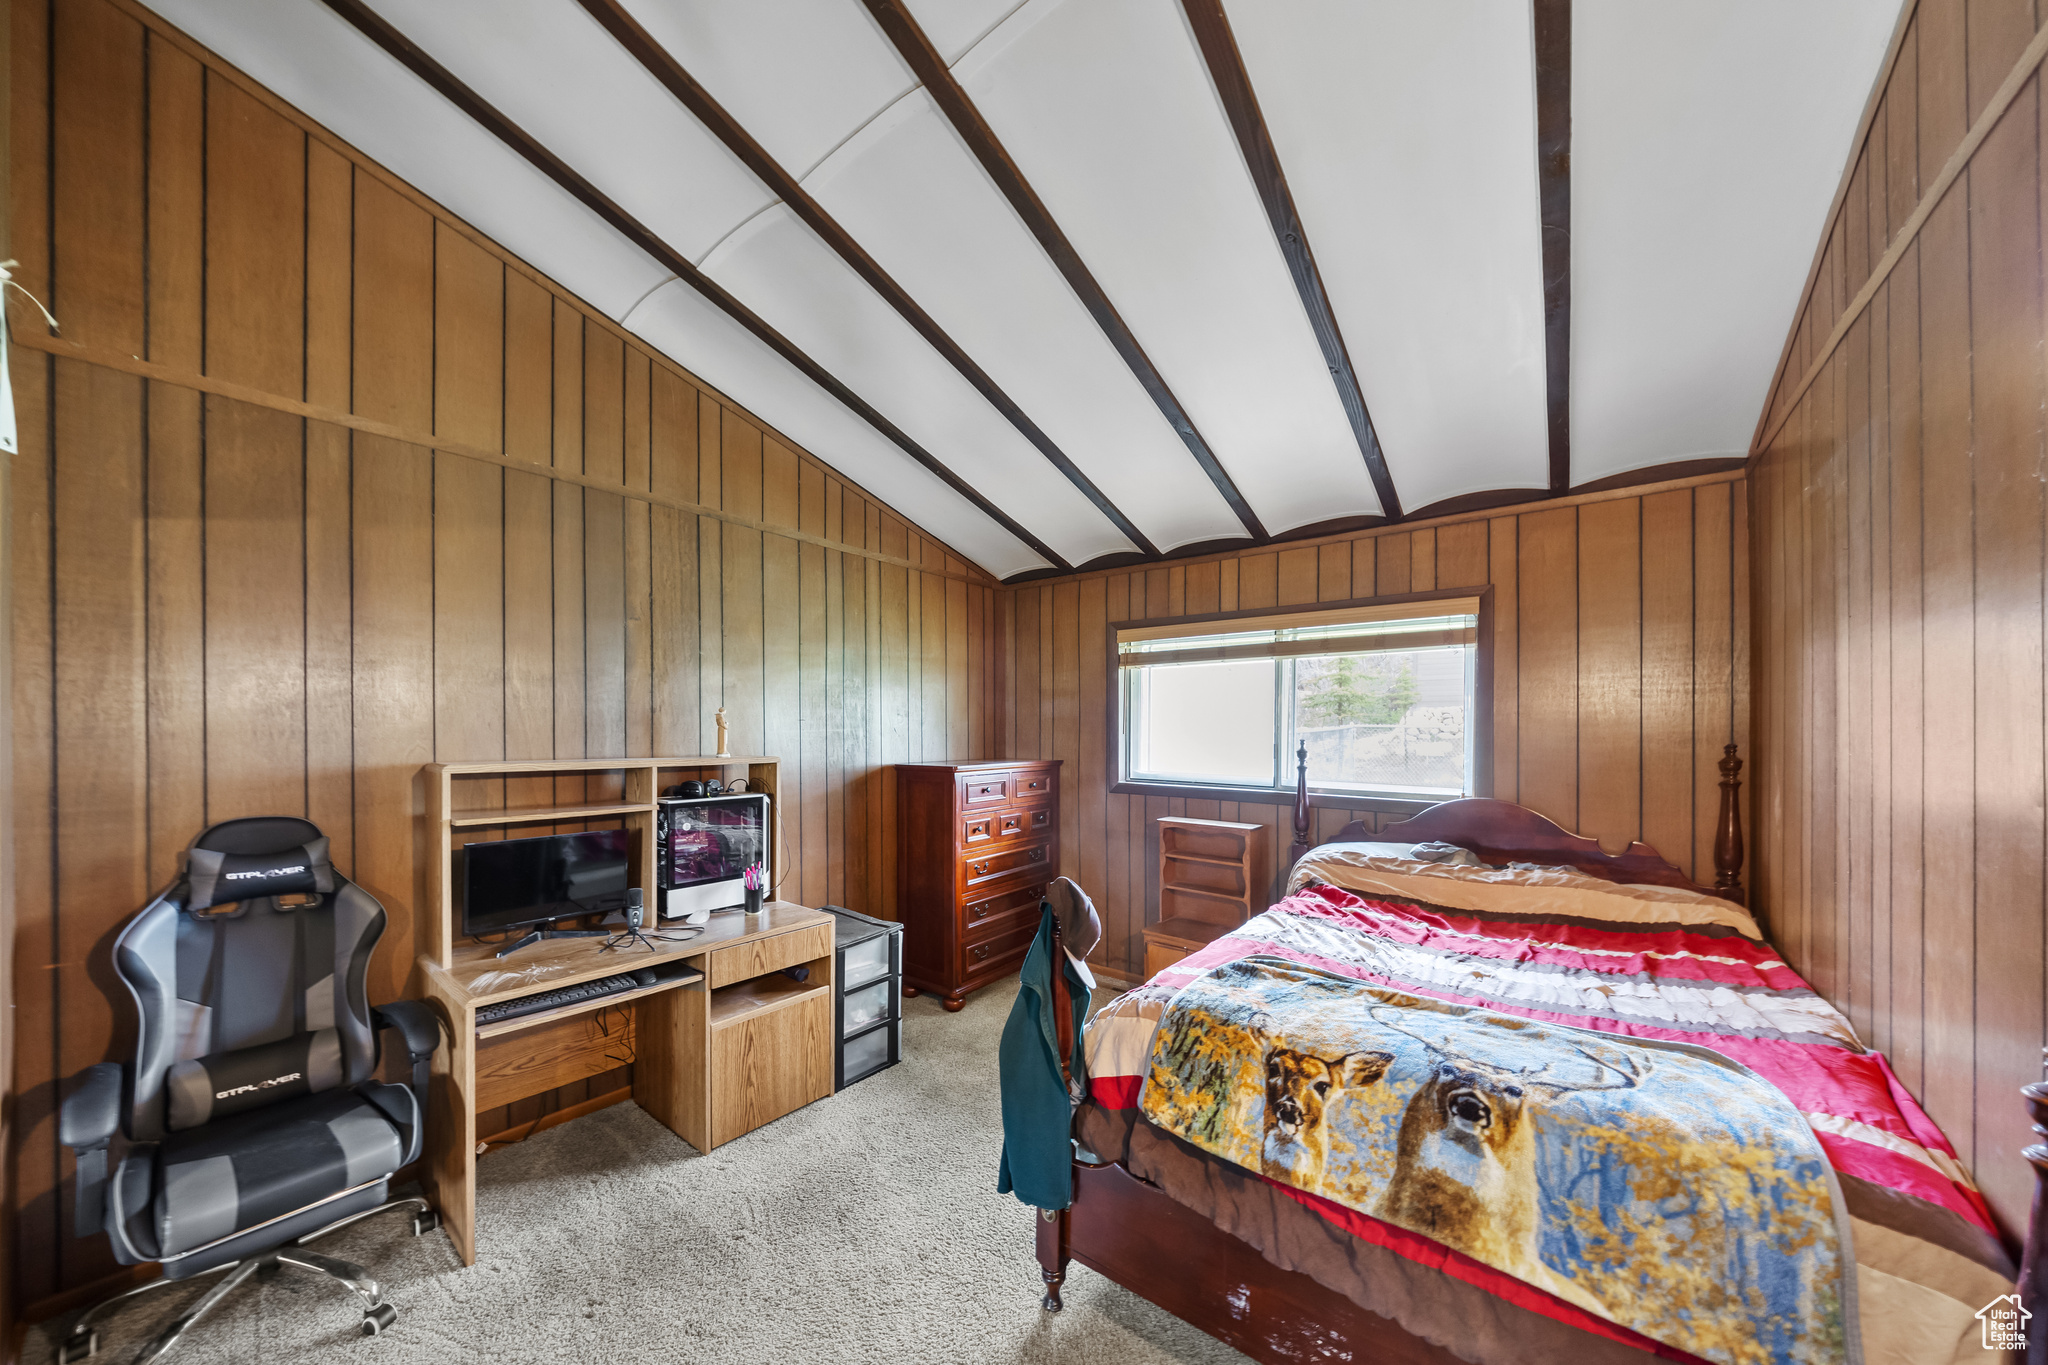 Carpeted bedroom with wood walls and vaulted ceiling with beams